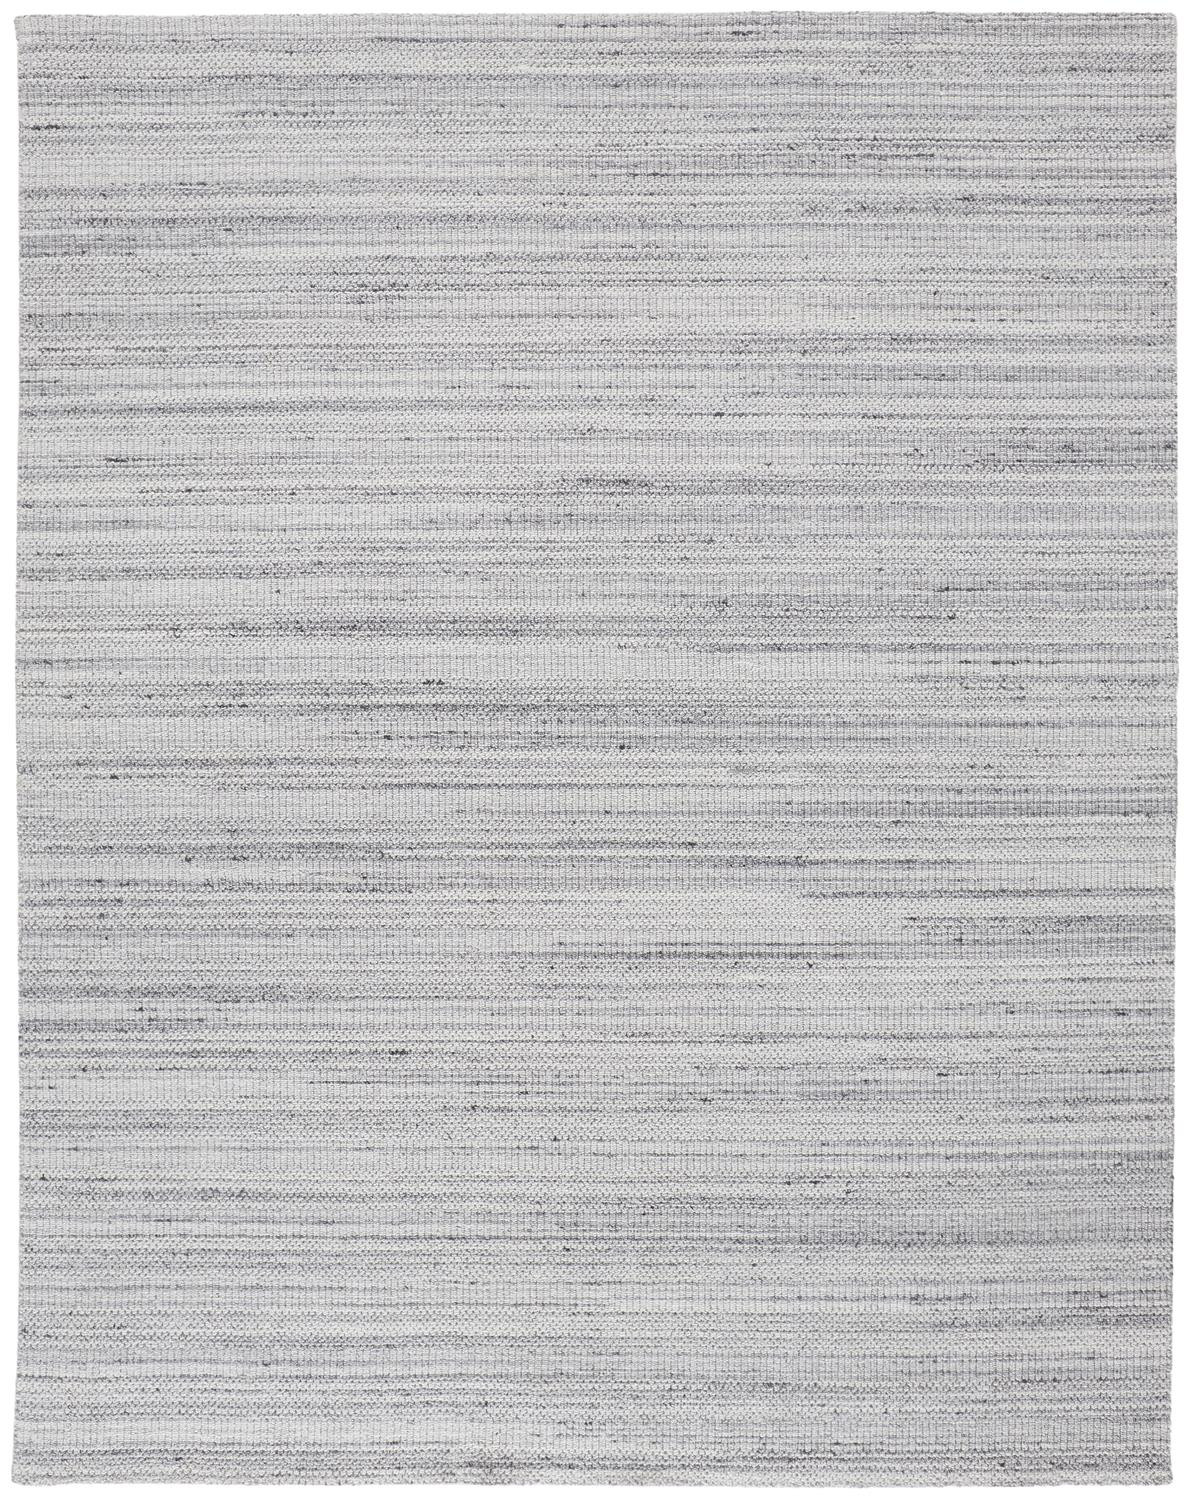 8' X 10' Silver Wool Hand Woven Stain Resistant Area Rug-514064-1